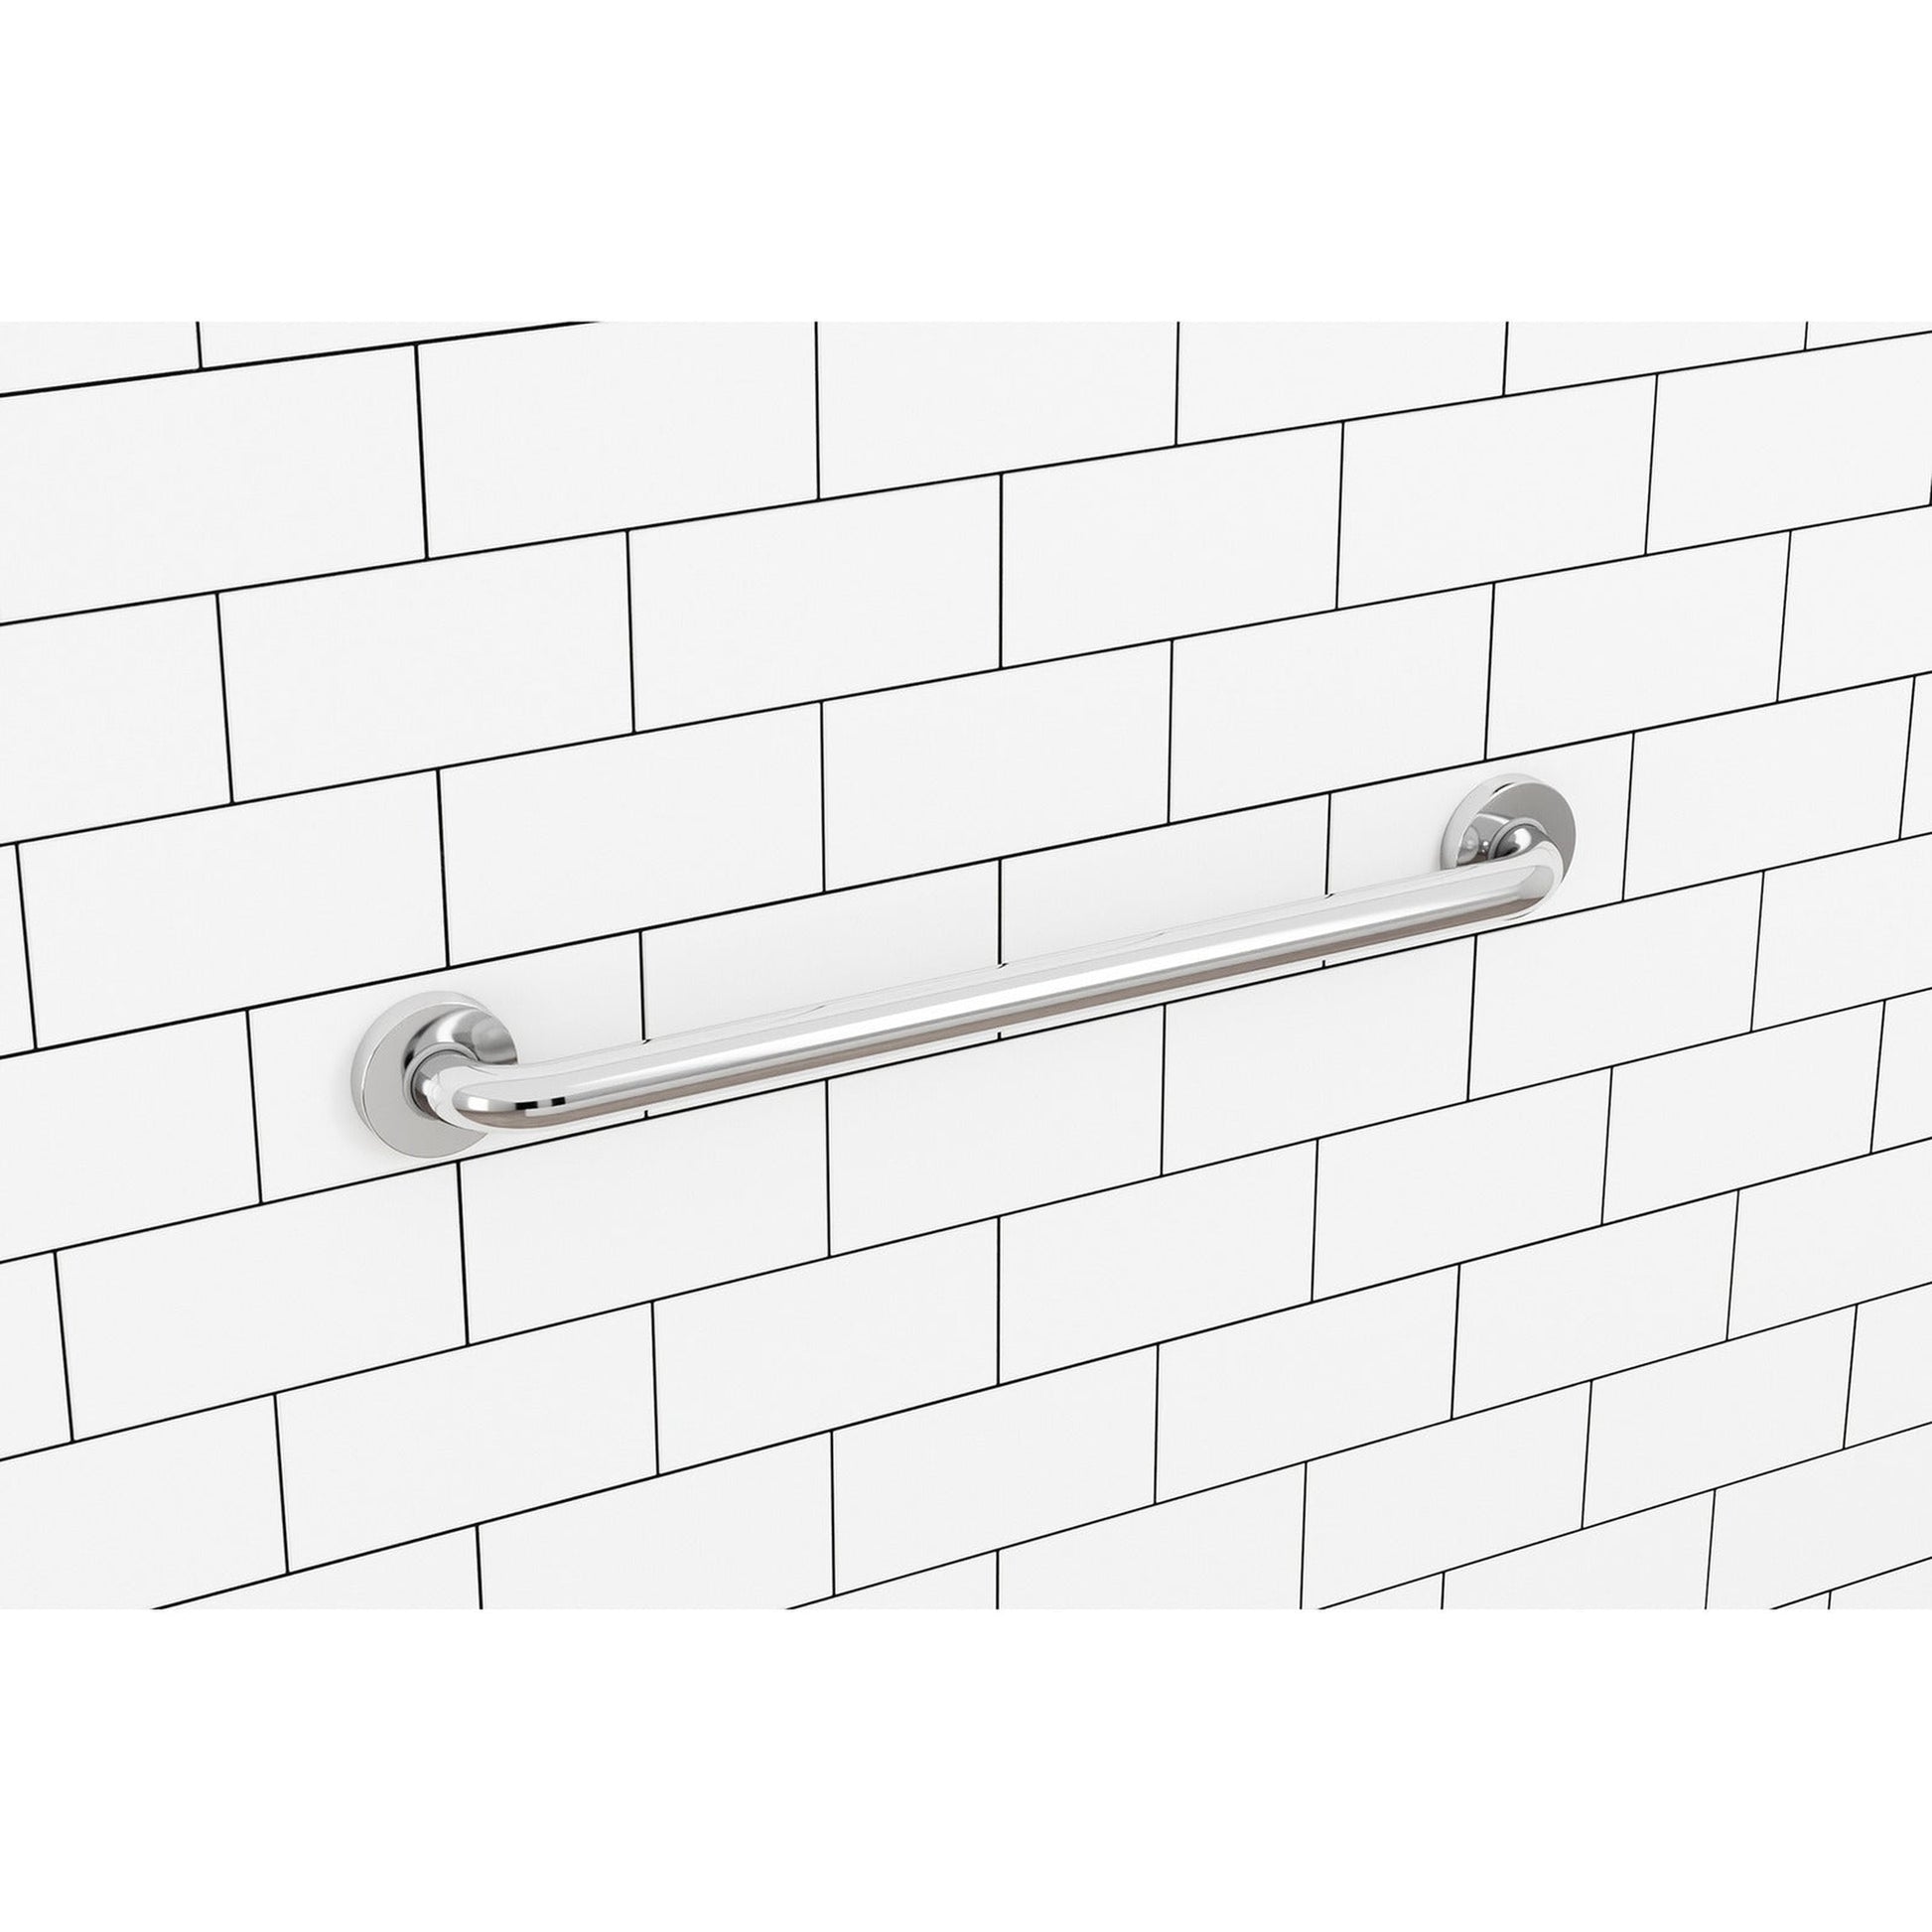 Evekare 24" x 1.25" Polished Stainless Steel Concealed Mount Grab Bar